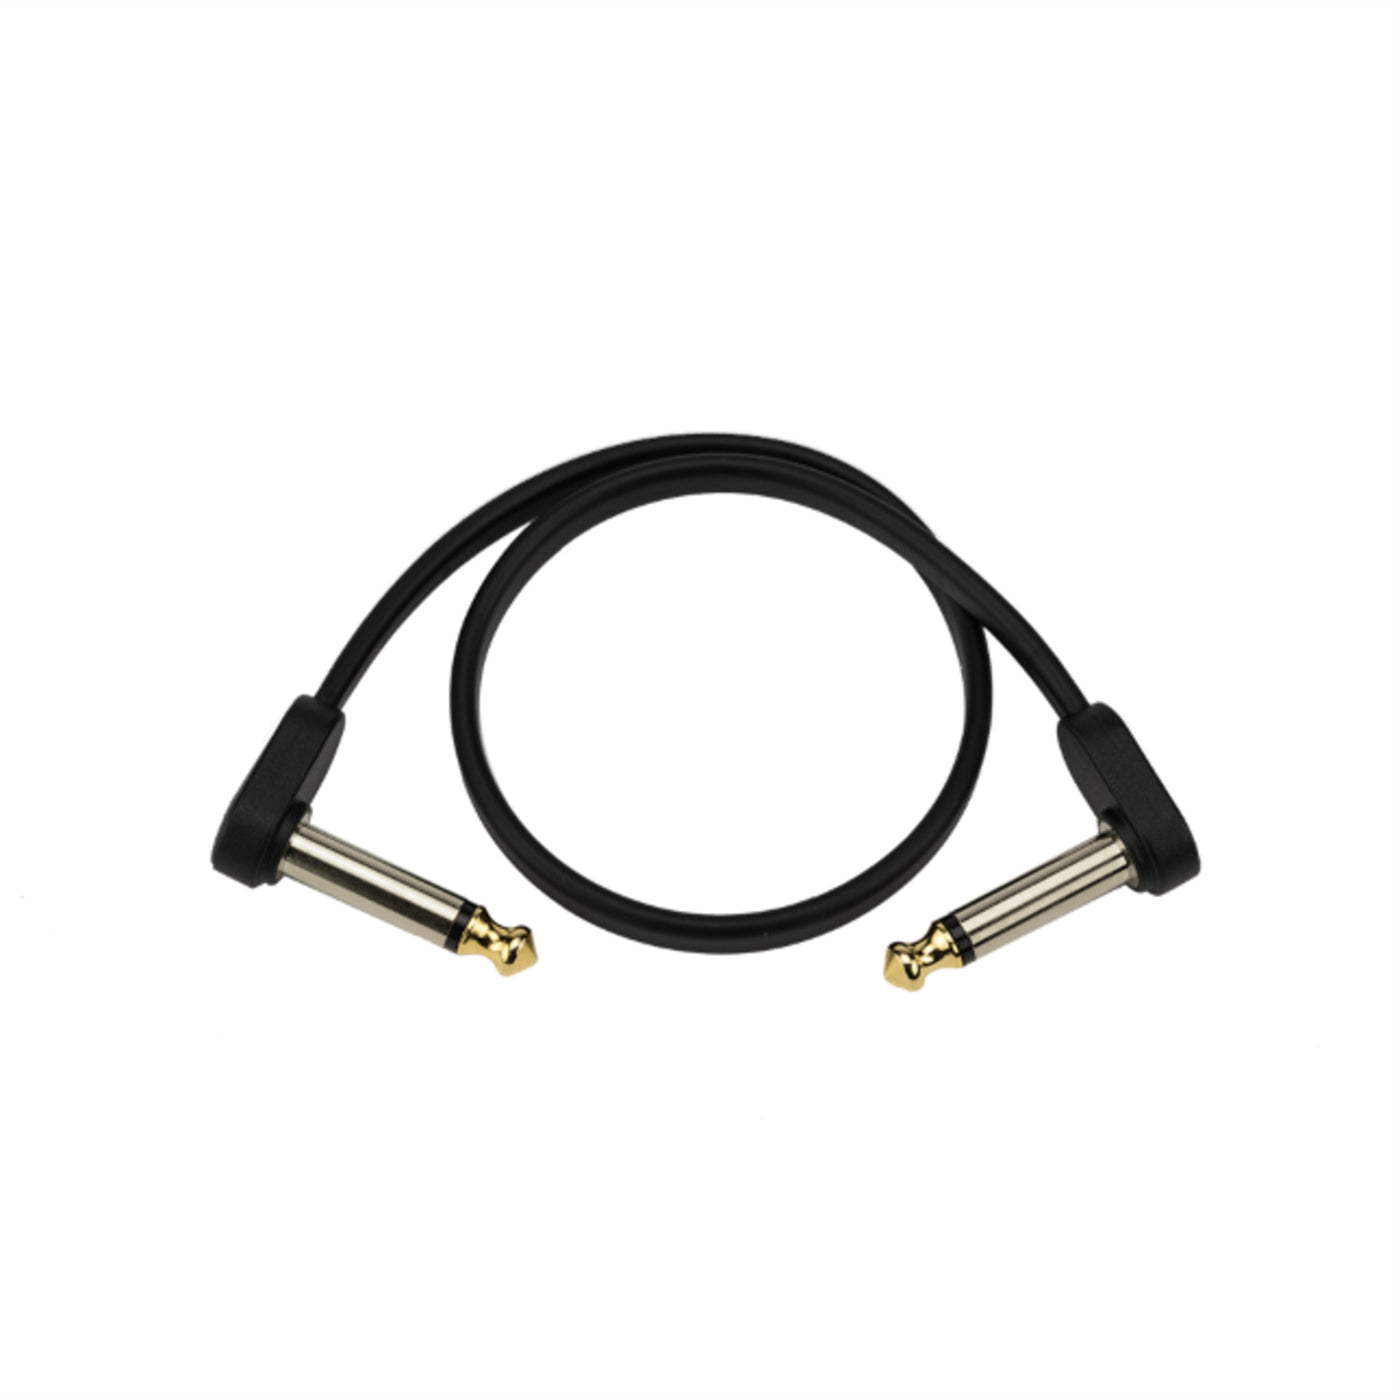 D'Addario Flat Patch Cable, 6-Inch Offset Right Angle, Twin Pack (PW-FPRR-206OS)